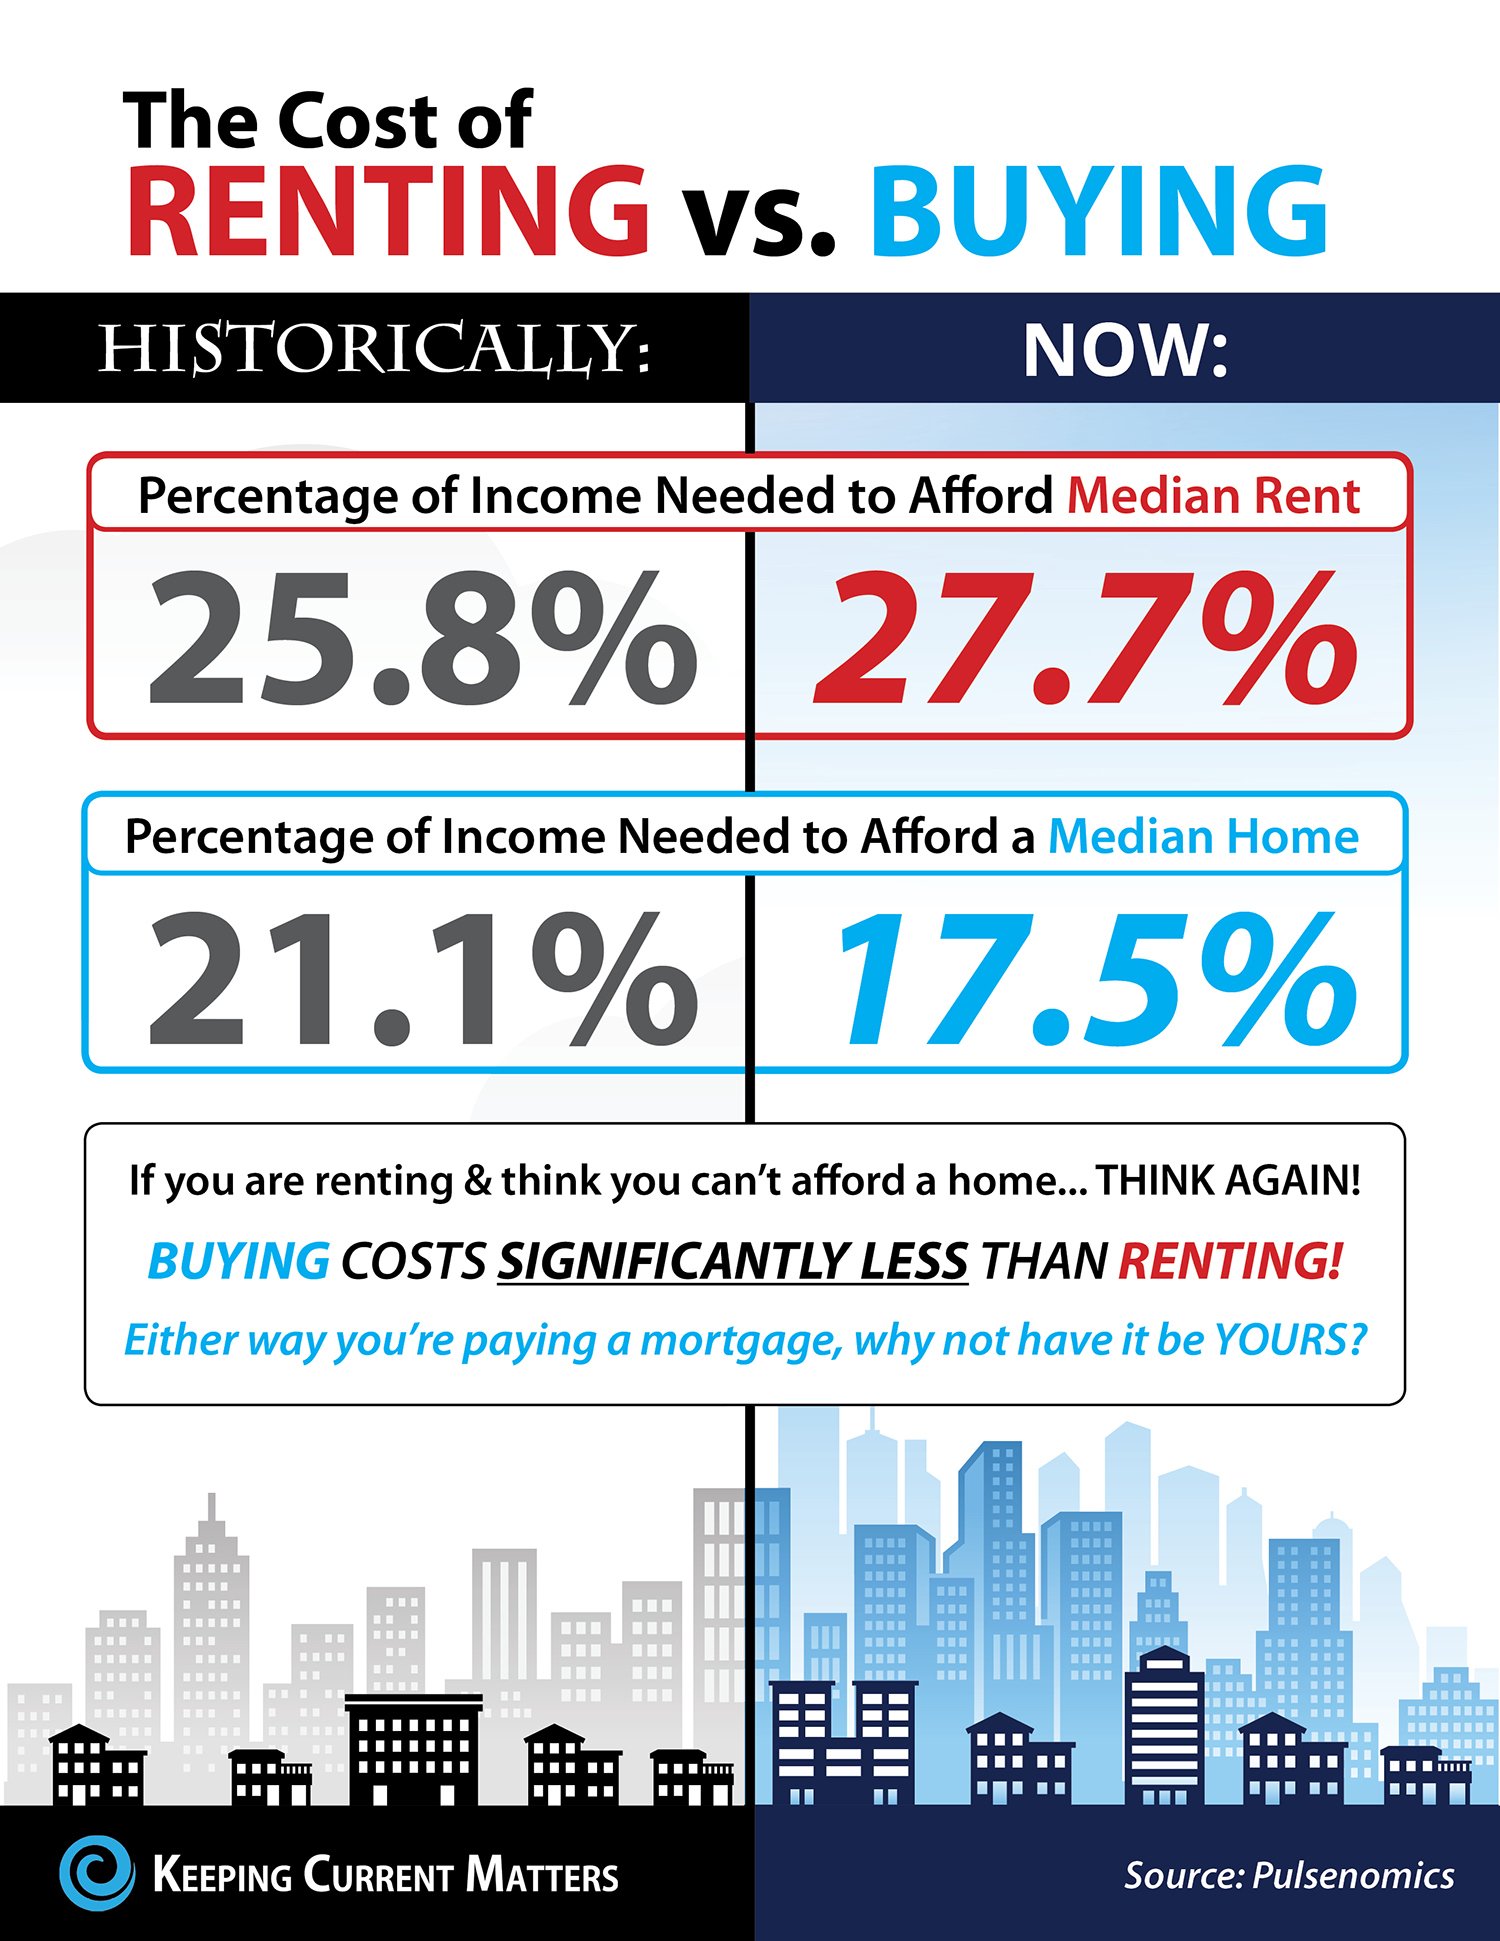 The cost of renting vs. buying